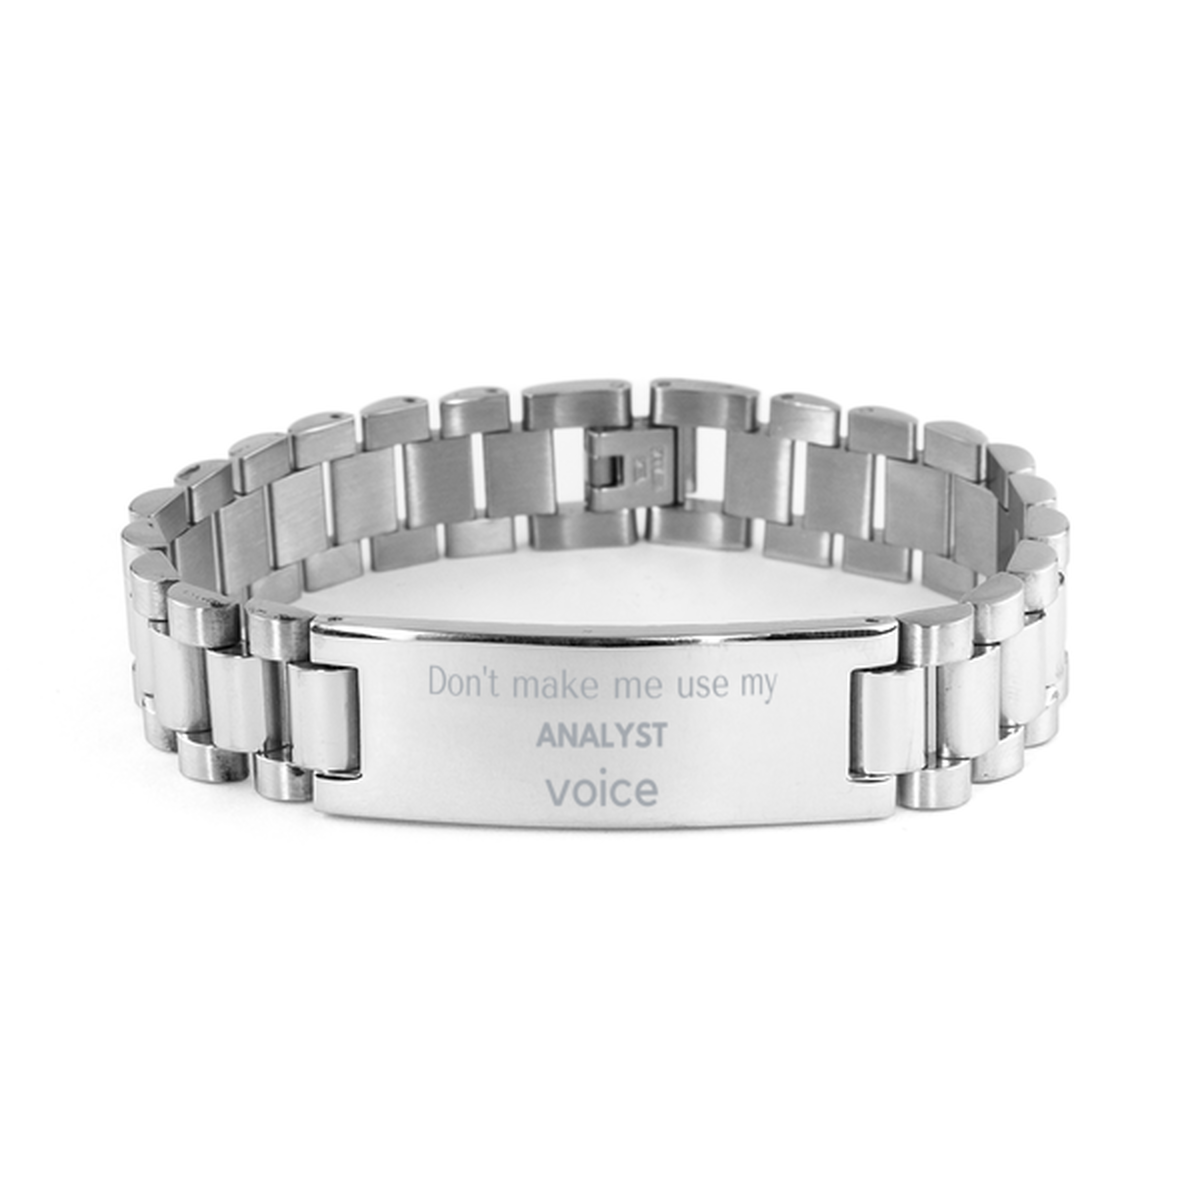 Don't make me use my Analyst voice, Sarcasm Analyst Gifts, Christmas Analyst Ladder Stainless Steel Bracelet Birthday Unique Gifts For Analyst Coworkers, Men, Women, Colleague, Friends